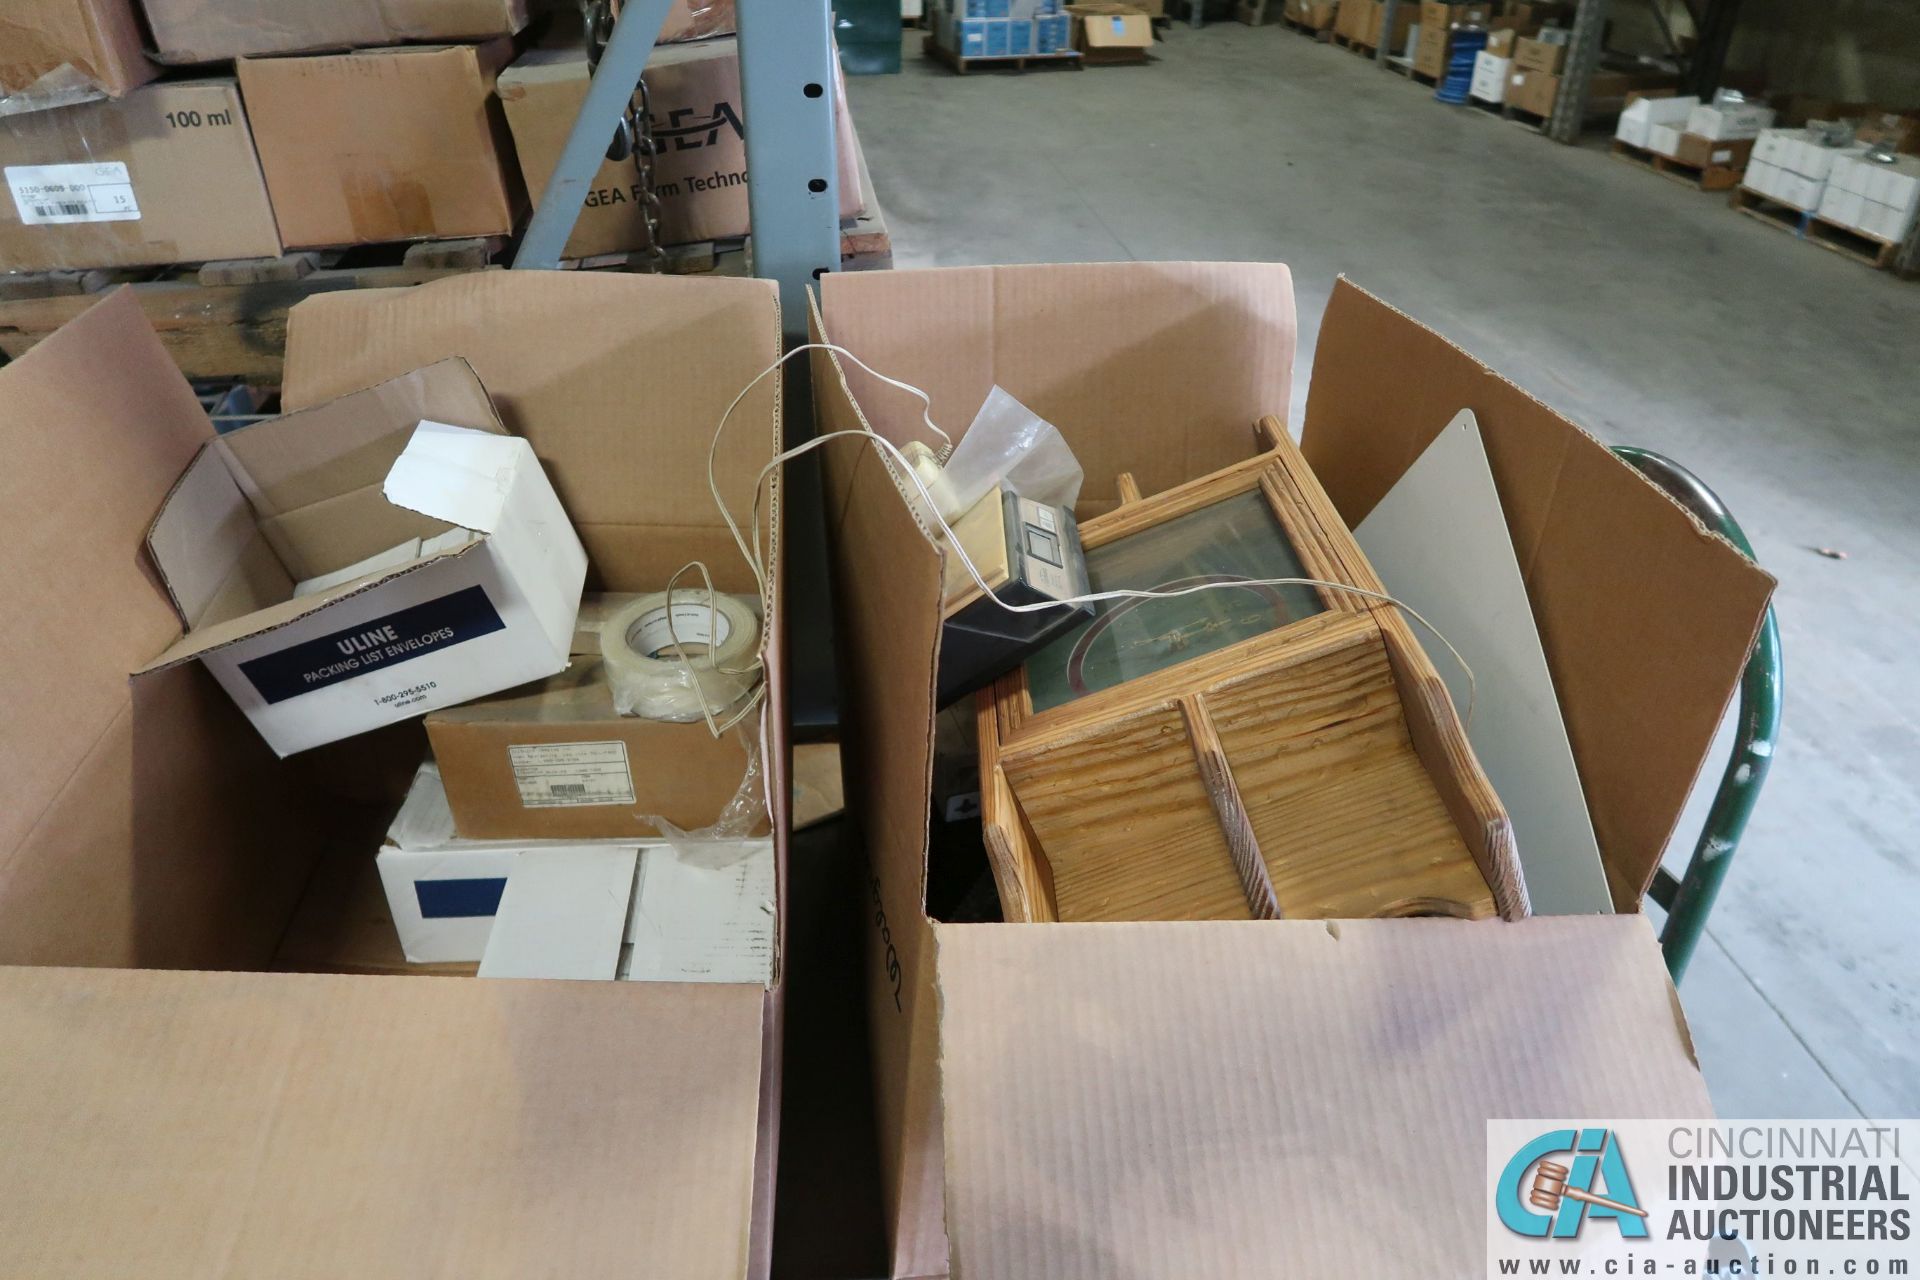 (LOT) STEEL BANDING CART, 2-WHEEL HARD TRUCK, SHIPPING TABLE, SHIPPING SUPPLIES - Image 3 of 4